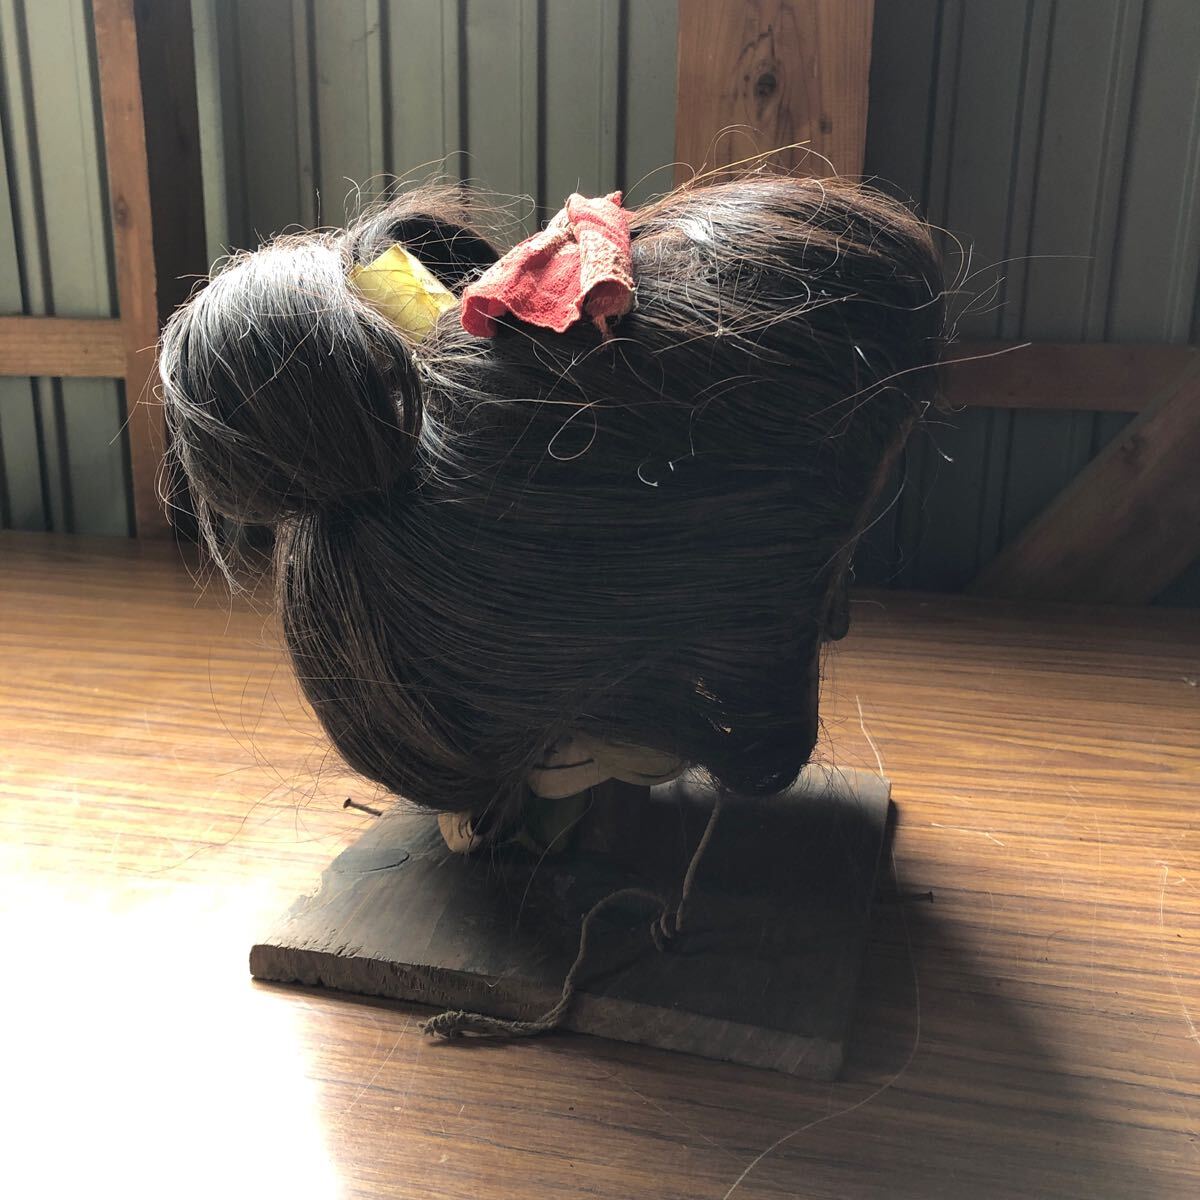  era large . play lawn grass . small shop Mai pcs Japanese coiffure old wig historical play Japanese clothes block .. rice field .. peach crack wig Event comedy festival .②